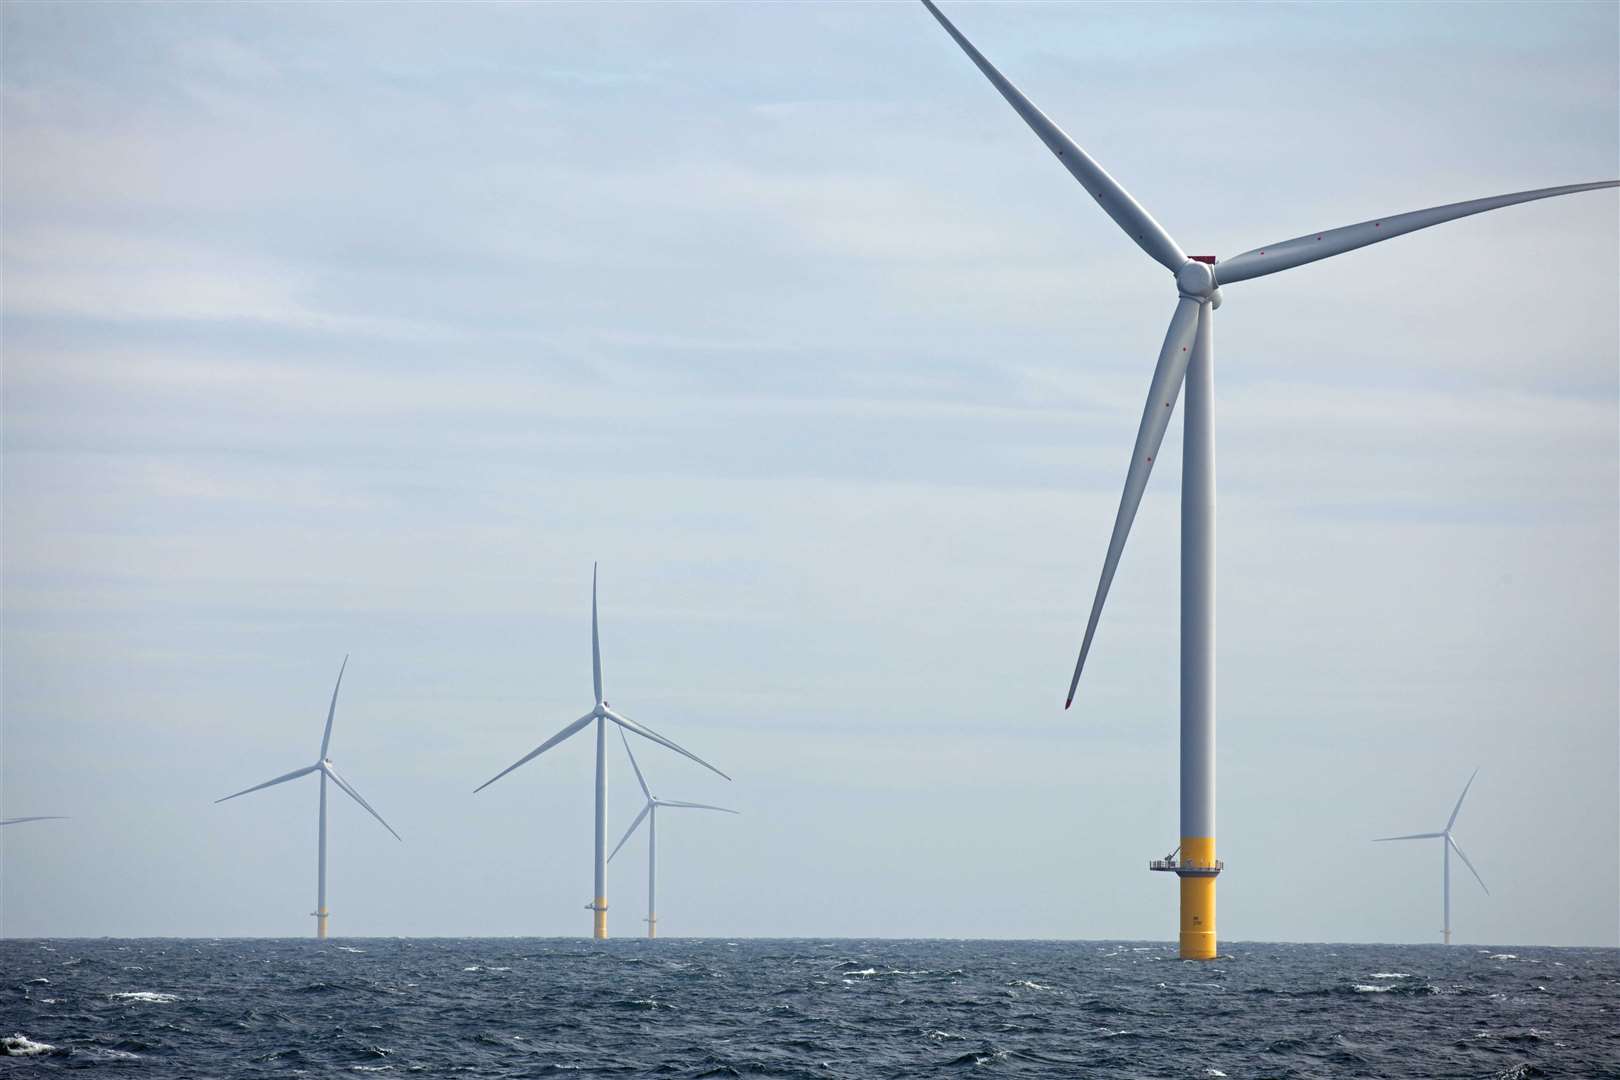 Ørsted’s Hornsea One offshore wind farm, comprising 174 7 MW turbines, lies off the Yorkshire coast,.